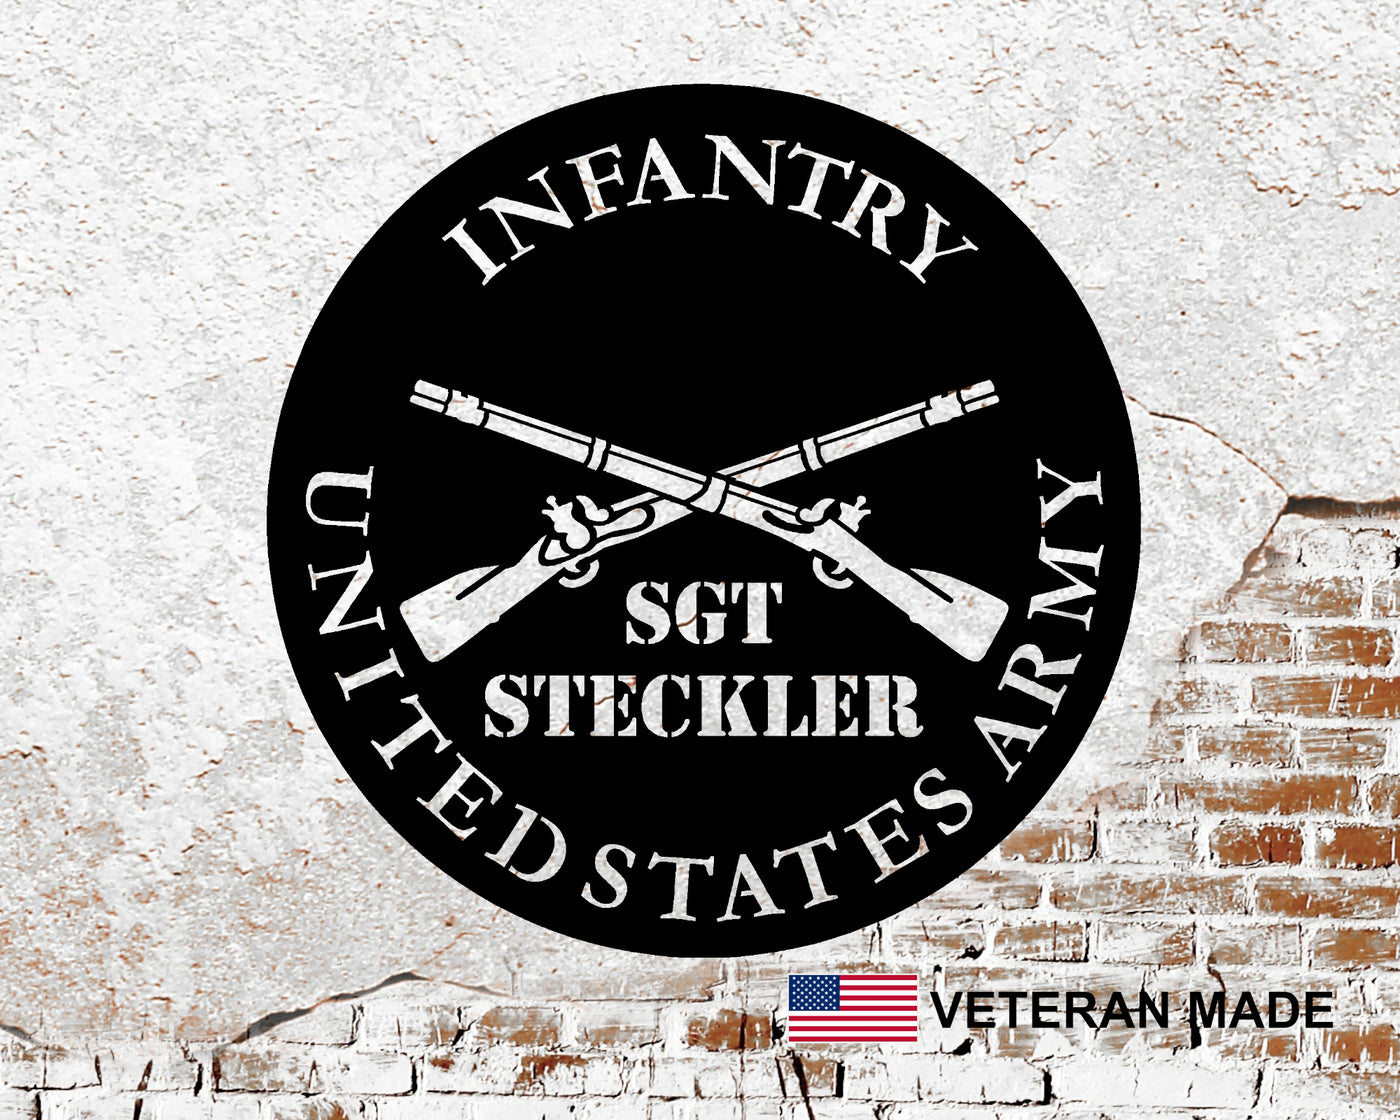 Personalized Army Infantry Metal Sign with Rank and Name - Madison Iron and Wood - Personalized sign - metal outdoor decor - Steel deocrations - american made products - veteran owned business products - fencing decorations - fencing supplies - custom wall decorations - personalized wall signs - steel - decorative post caps - steel post caps - metal post caps - brackets - structural brackets - home improvement - easter - easter decorations - easter gift - easter yard decor